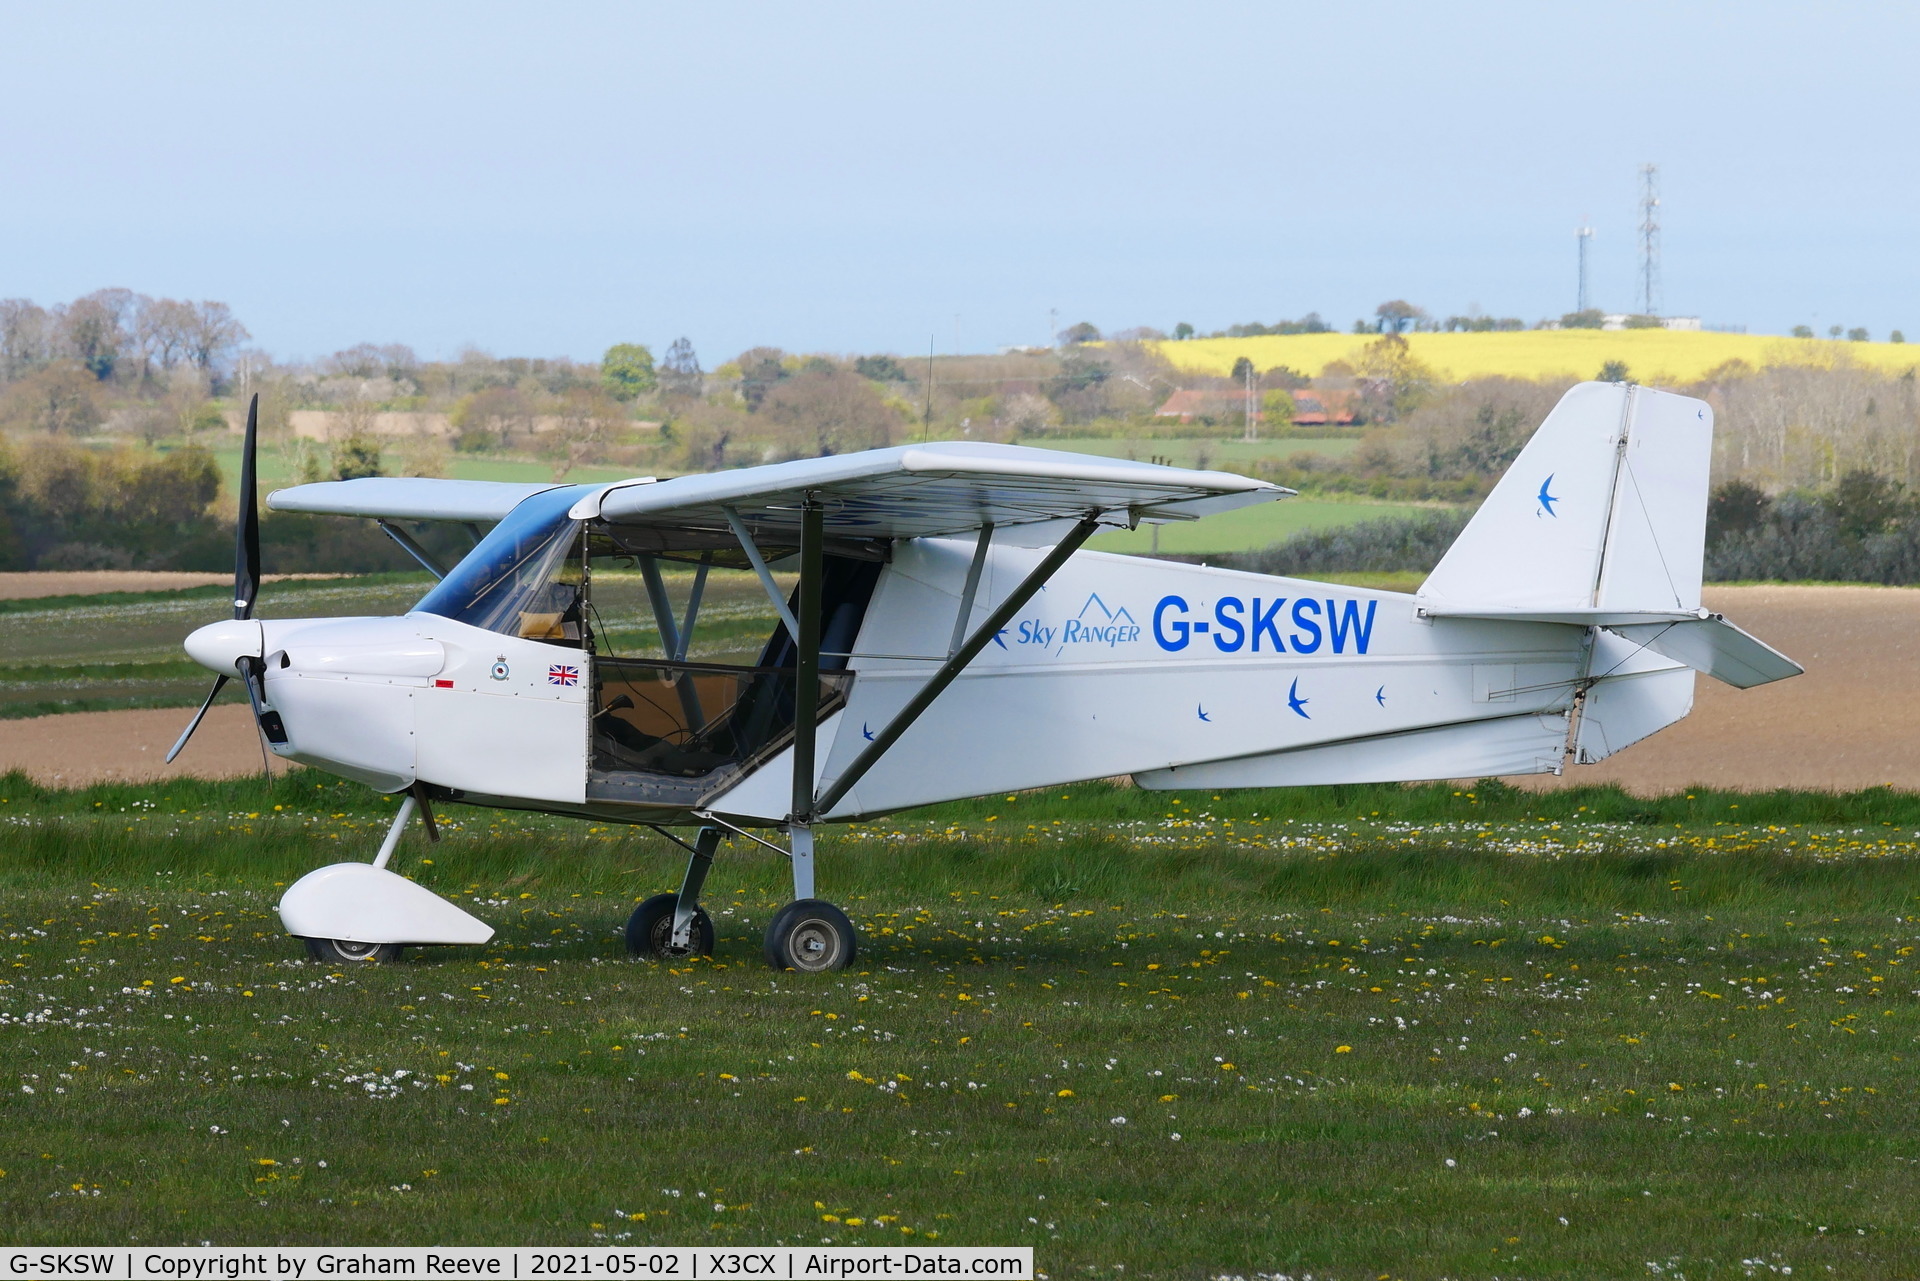 G-SKSW, 2007 Skyranger Swift 912S(1) C/N BMAA/HB/553, Seen at Northrepps with the wheel spats removed from the main under carriage.